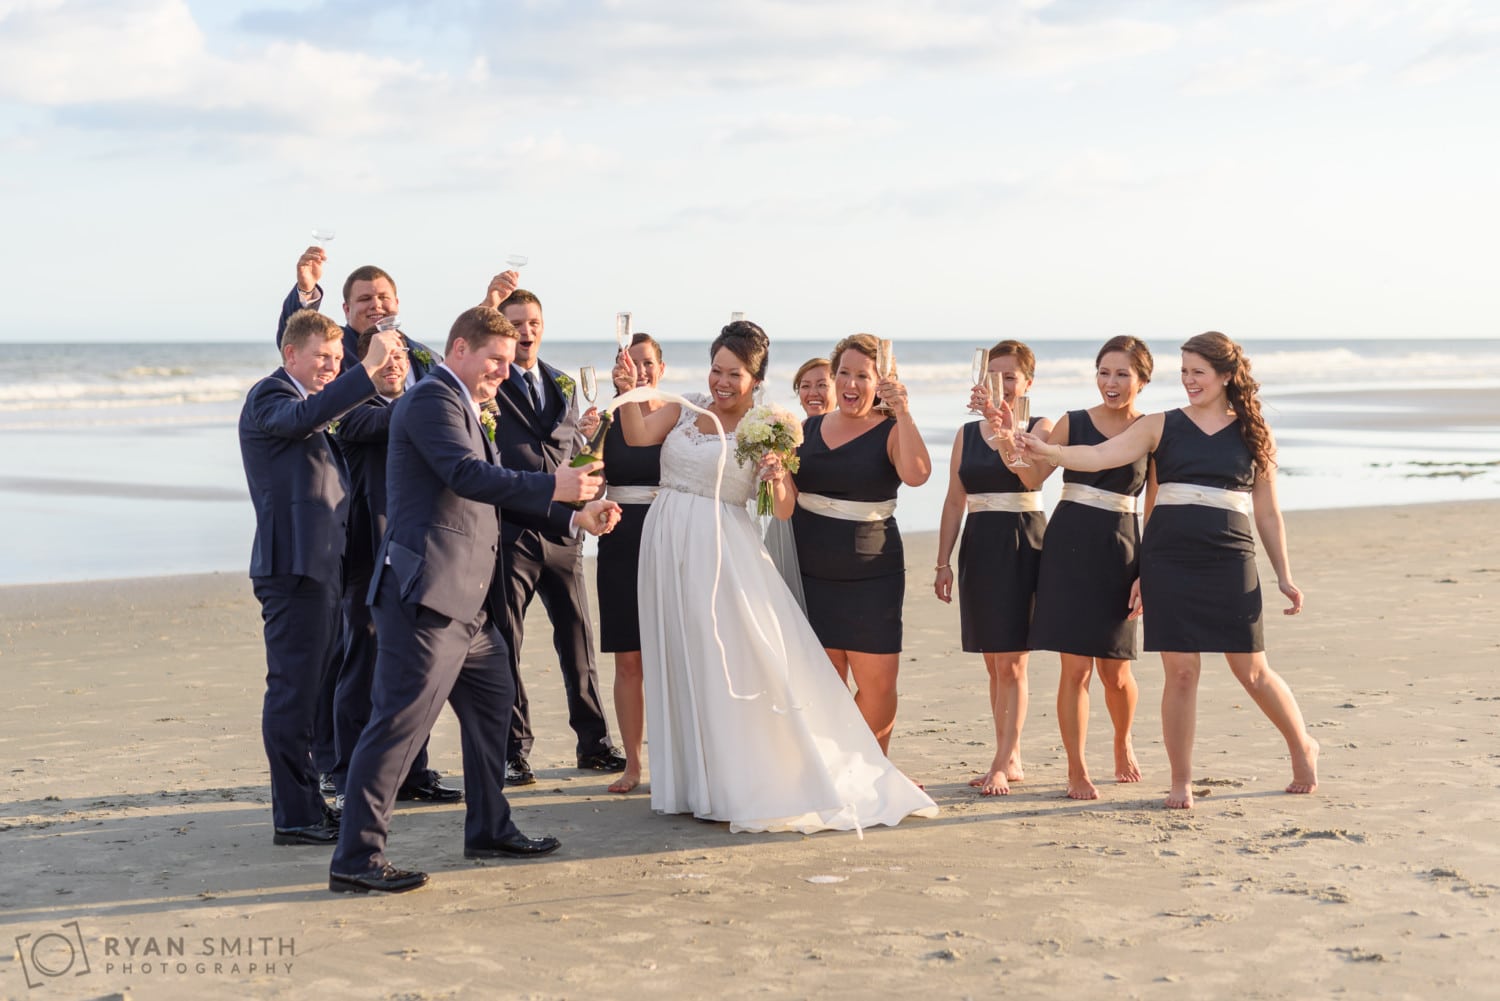 Popping the champagne cork on the beach - Dye Club at Barefoot Resort